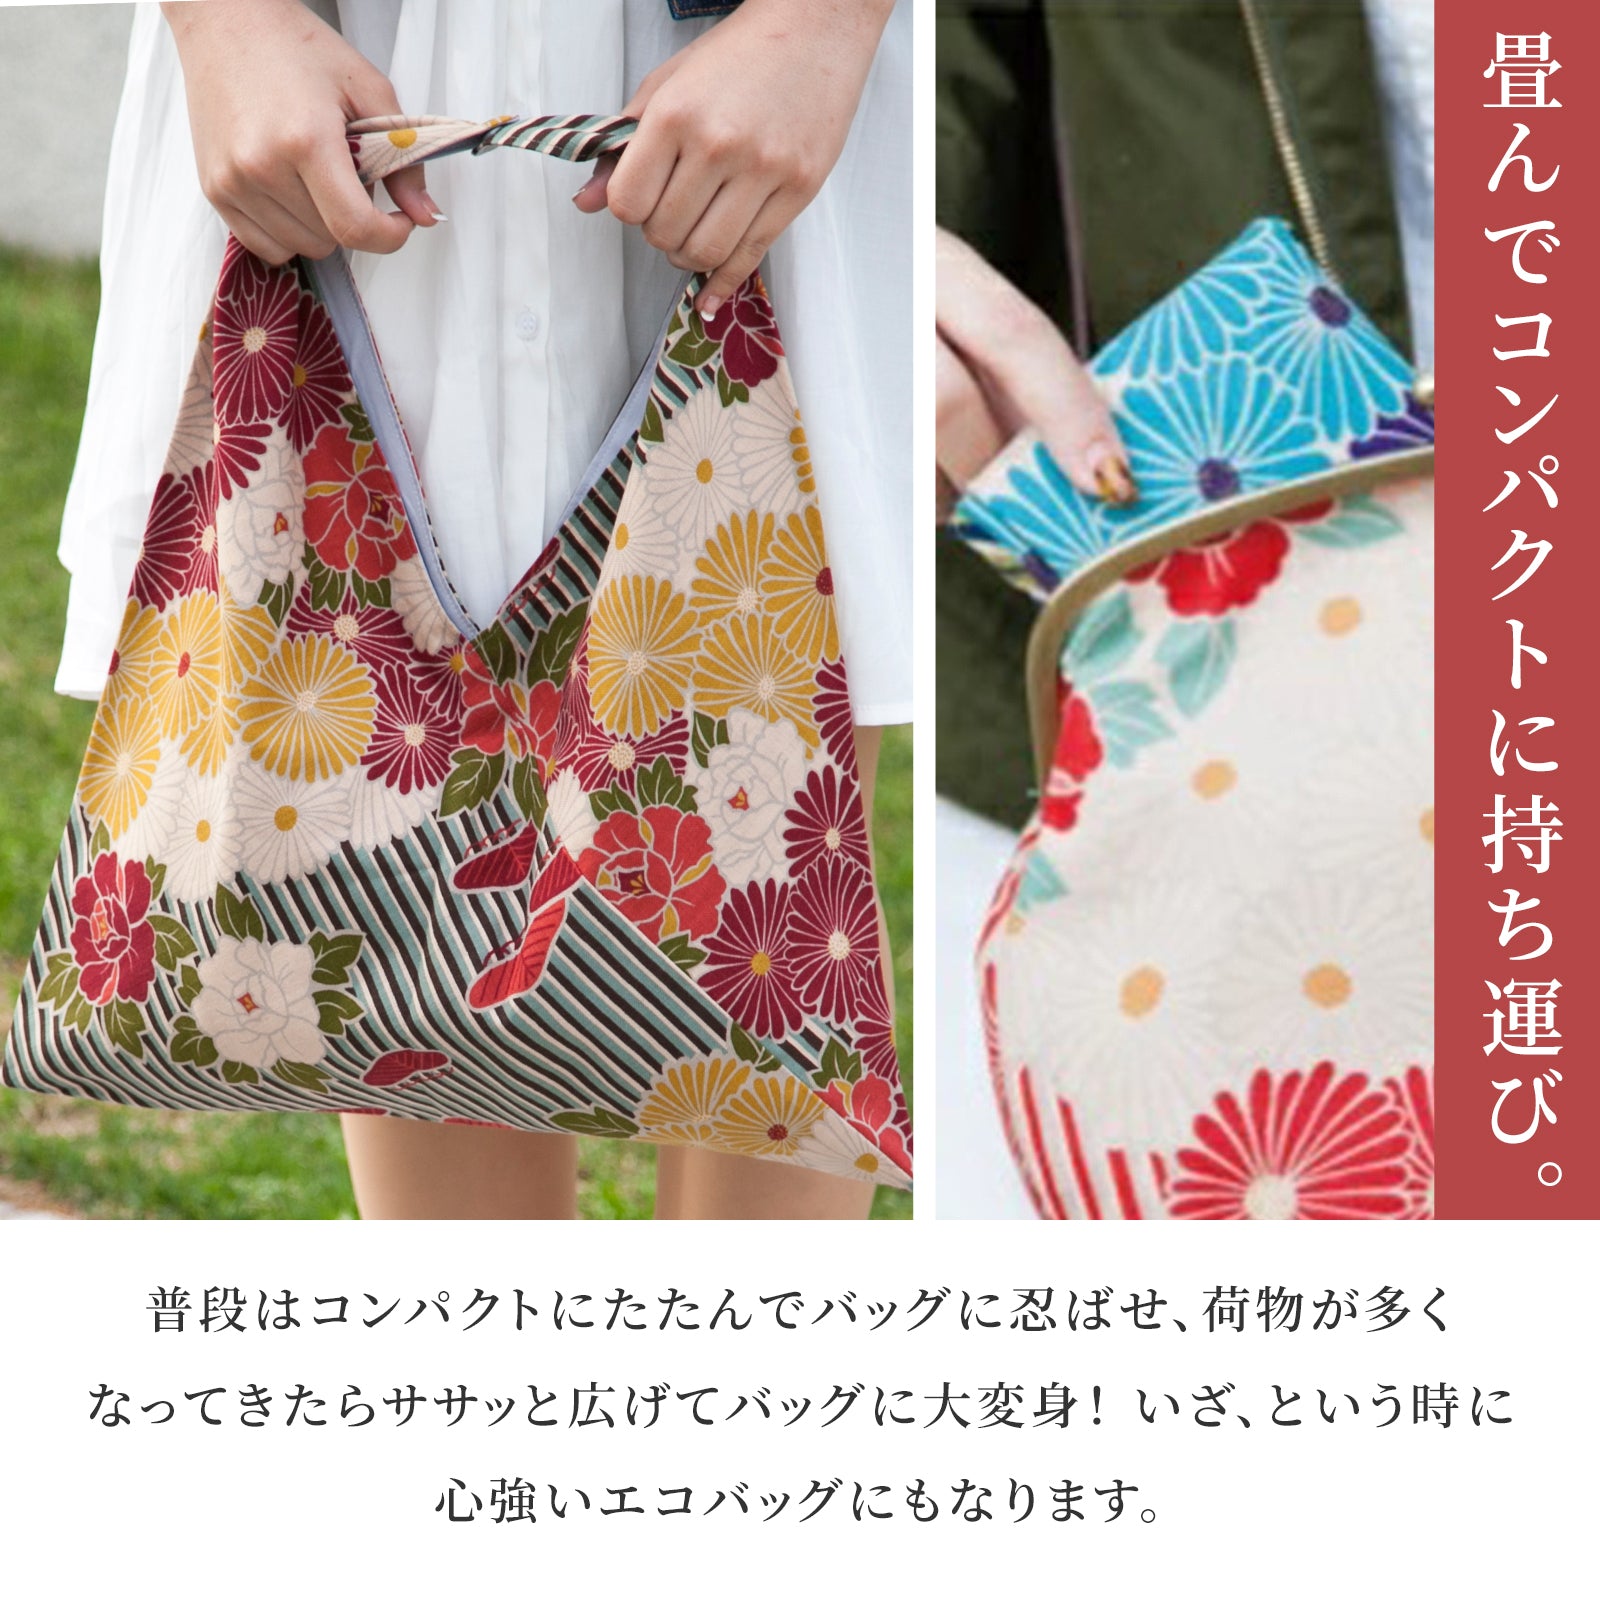 How to Make a Furoshiki Bag for your Grocery Shopping